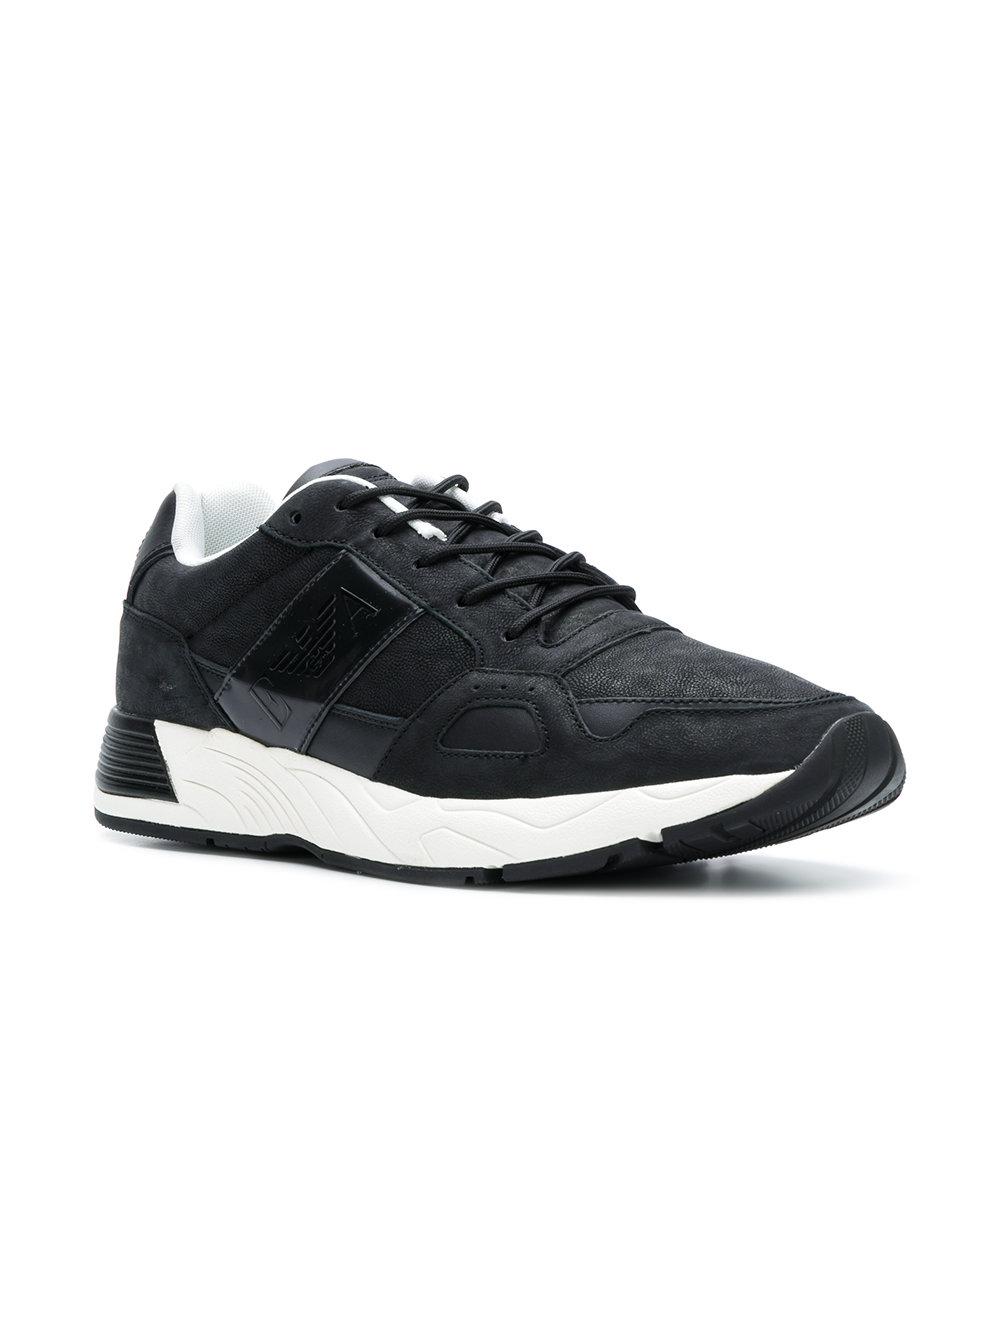 Emporio Armani Leather Runner Sneakers 